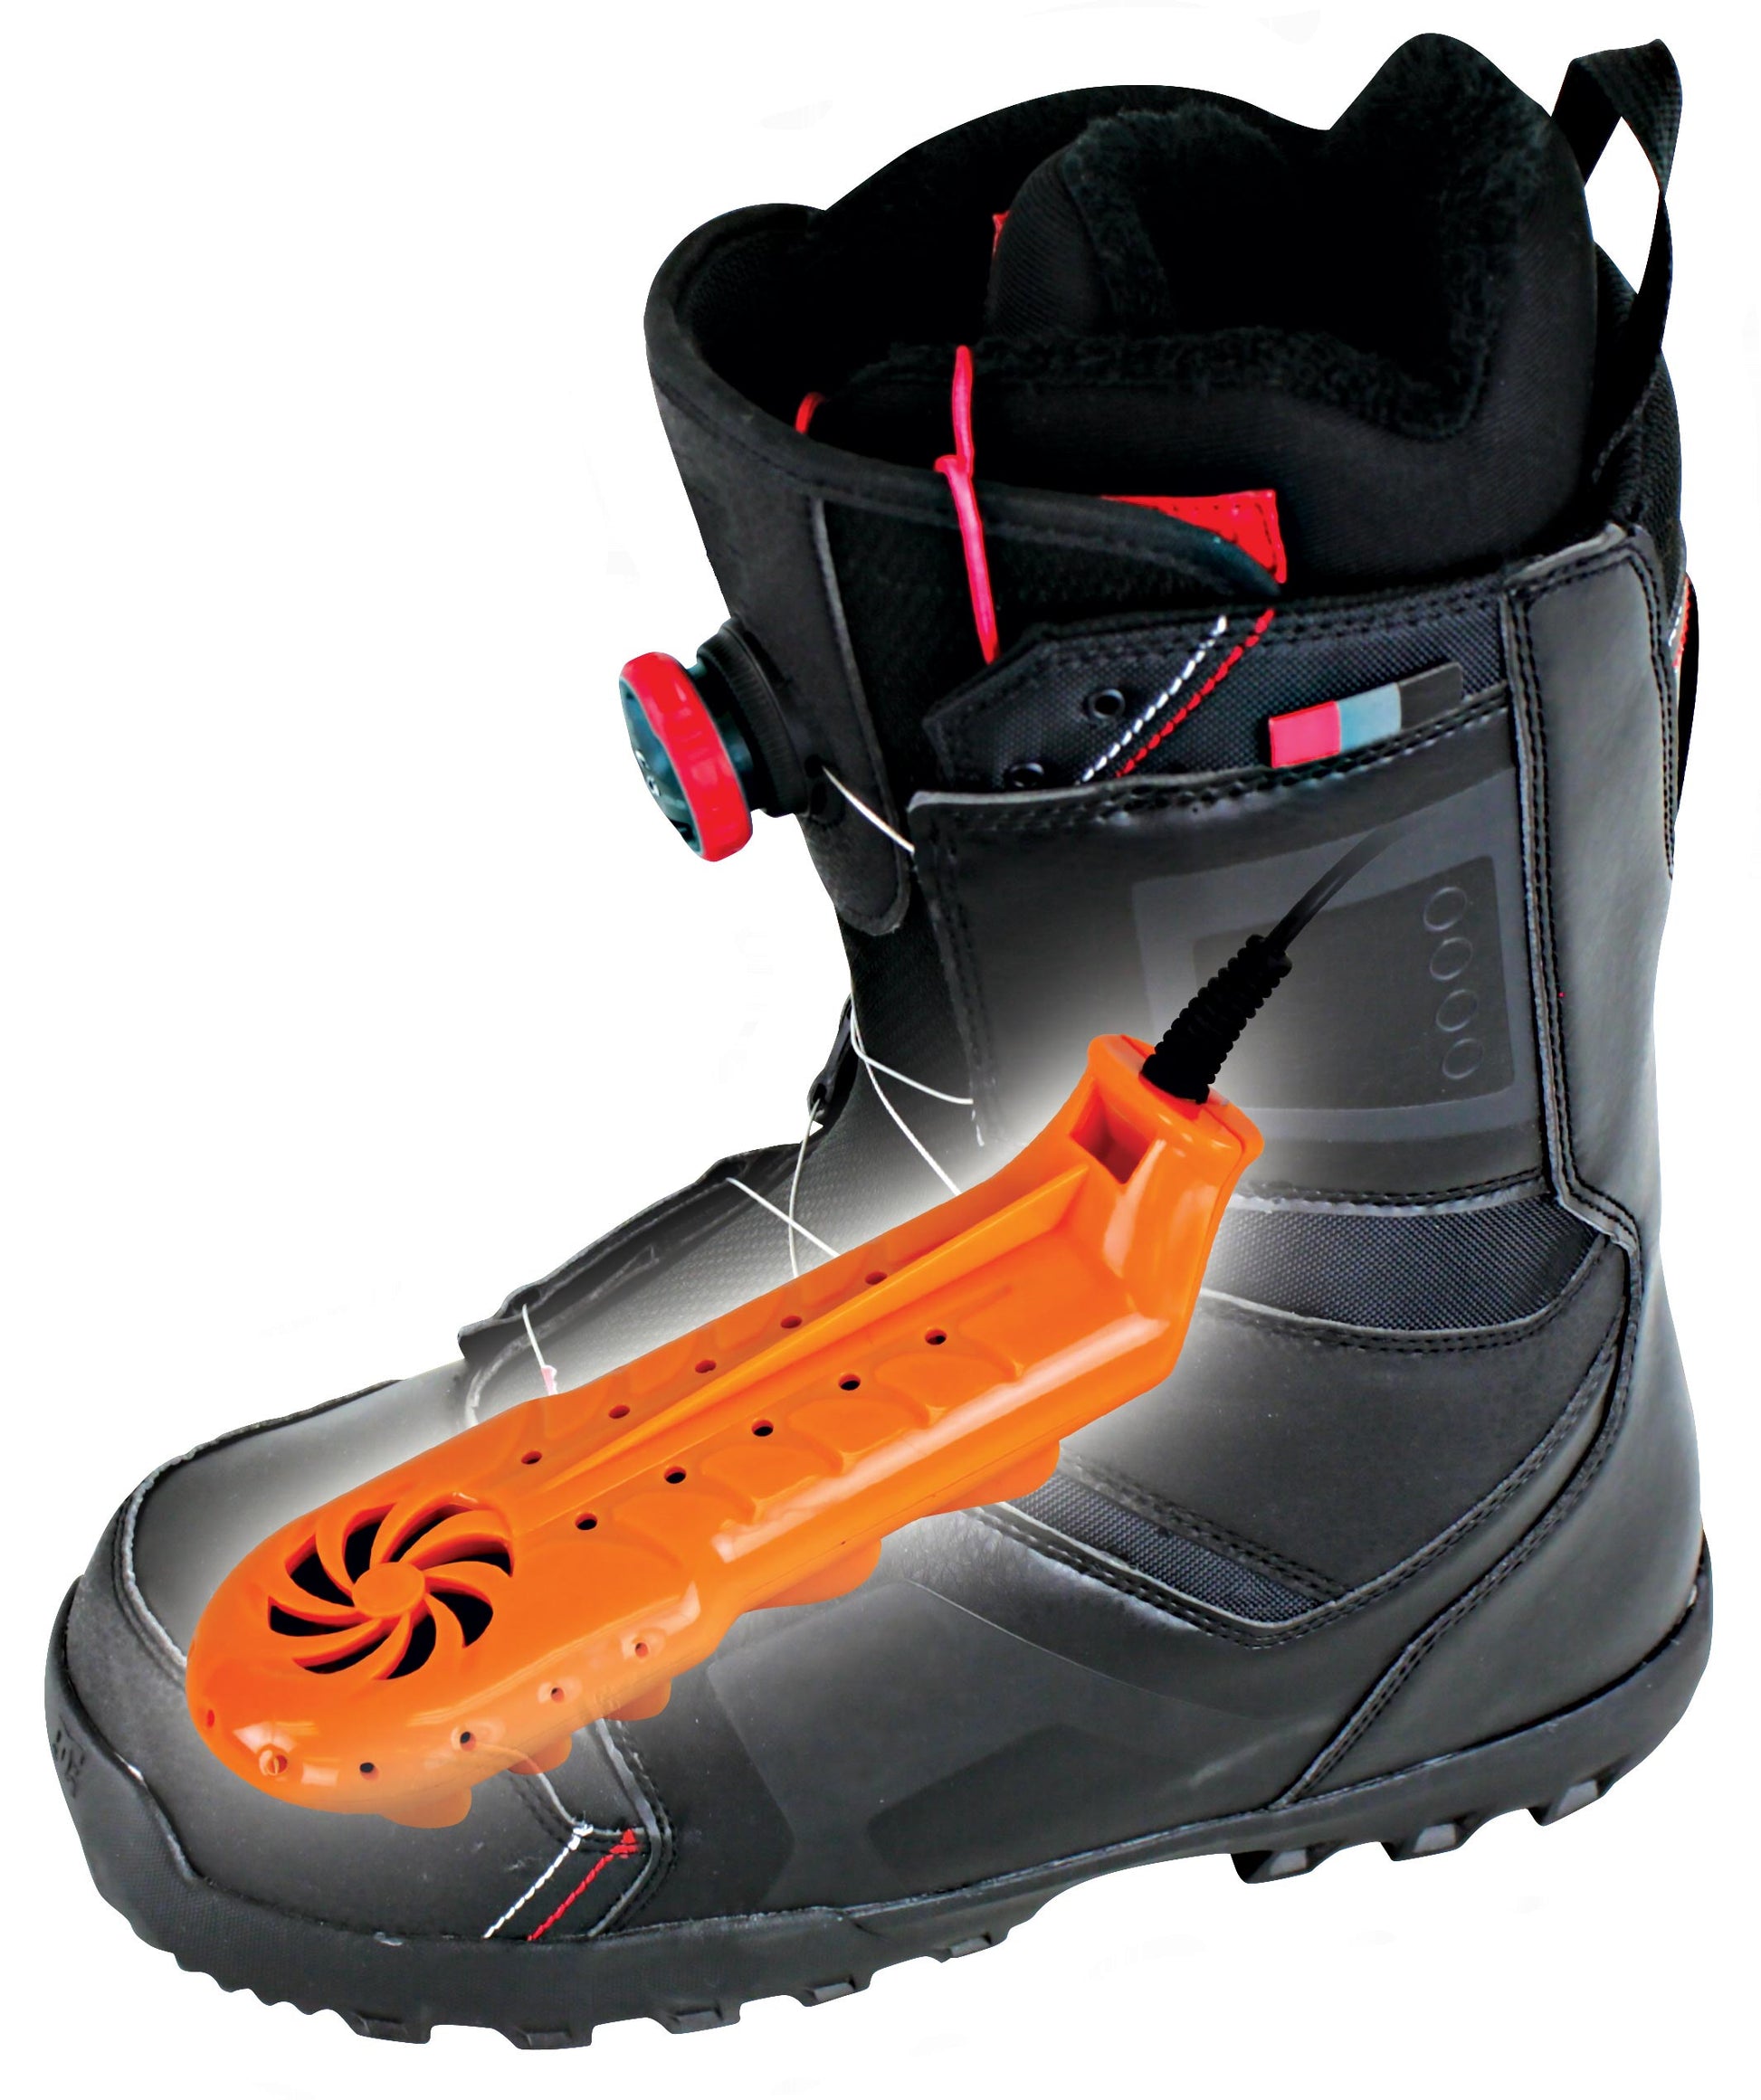 DryGuy Solutions to All Your Wet & Sweaty Shoes, Force Dry DX + Travel Boot  Warmer, Bundle